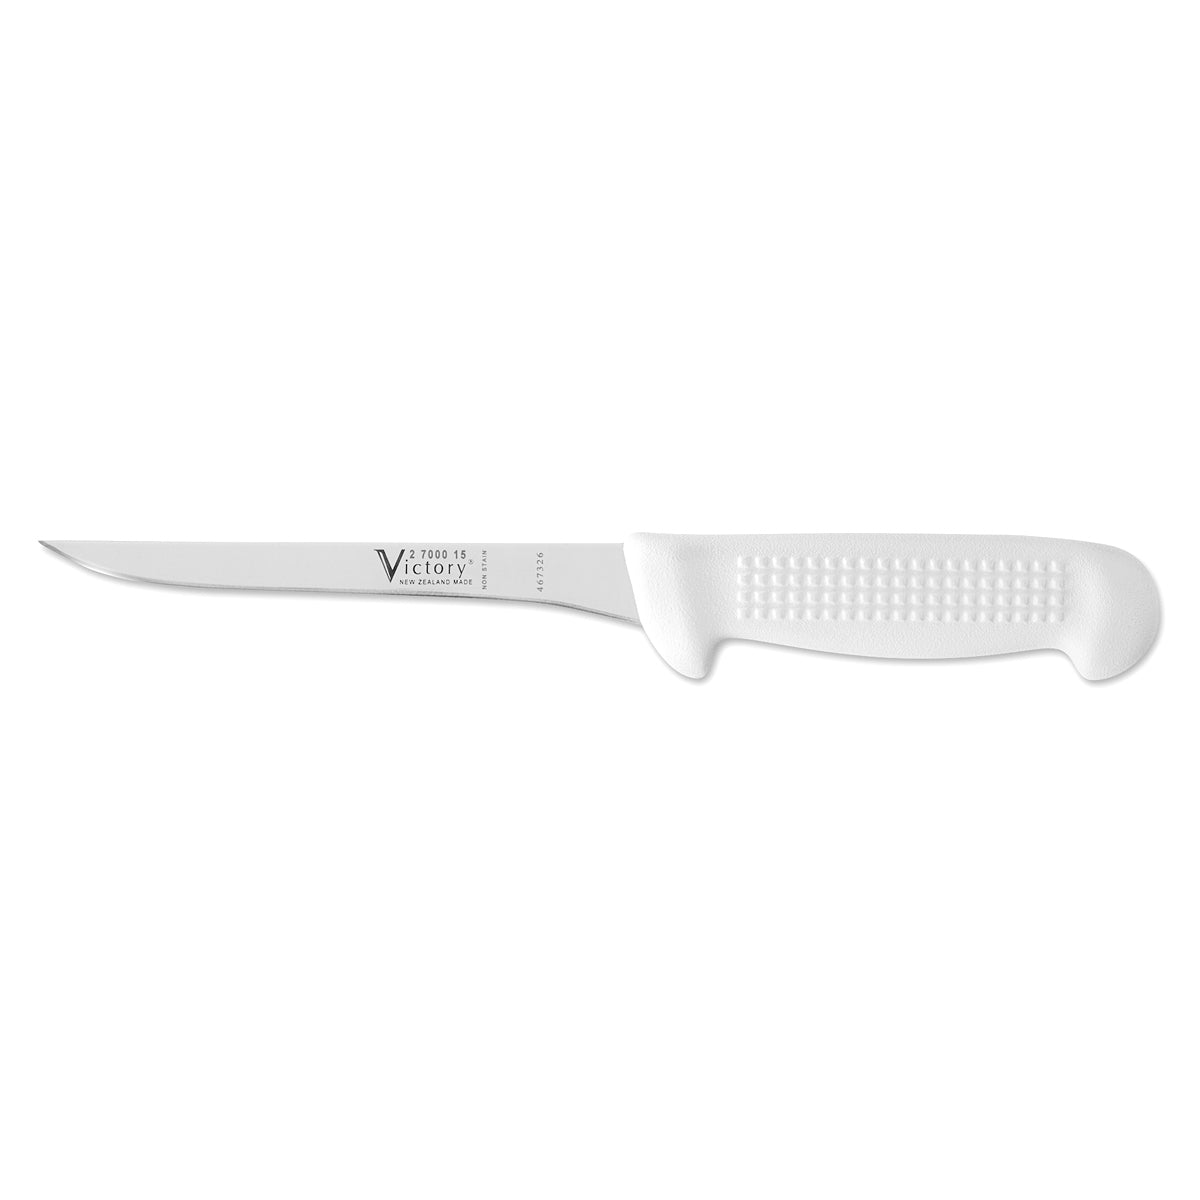 Victory 15cm Stainless Steel Flexible Straight Boning/Filleting Knife 2 7000 15